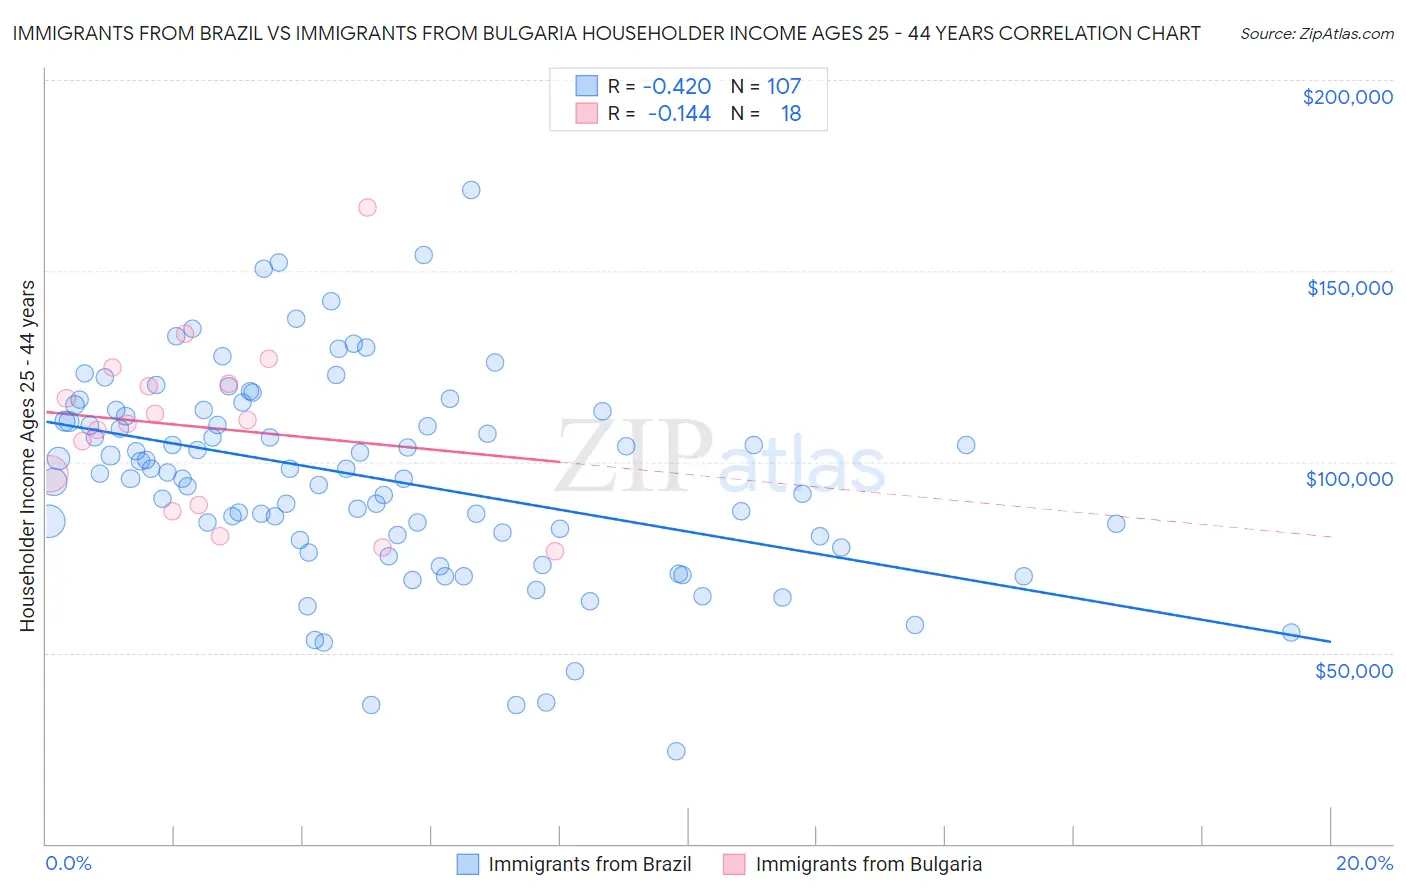 Immigrants from Brazil vs Immigrants from Bulgaria Householder Income Ages 25 - 44 years